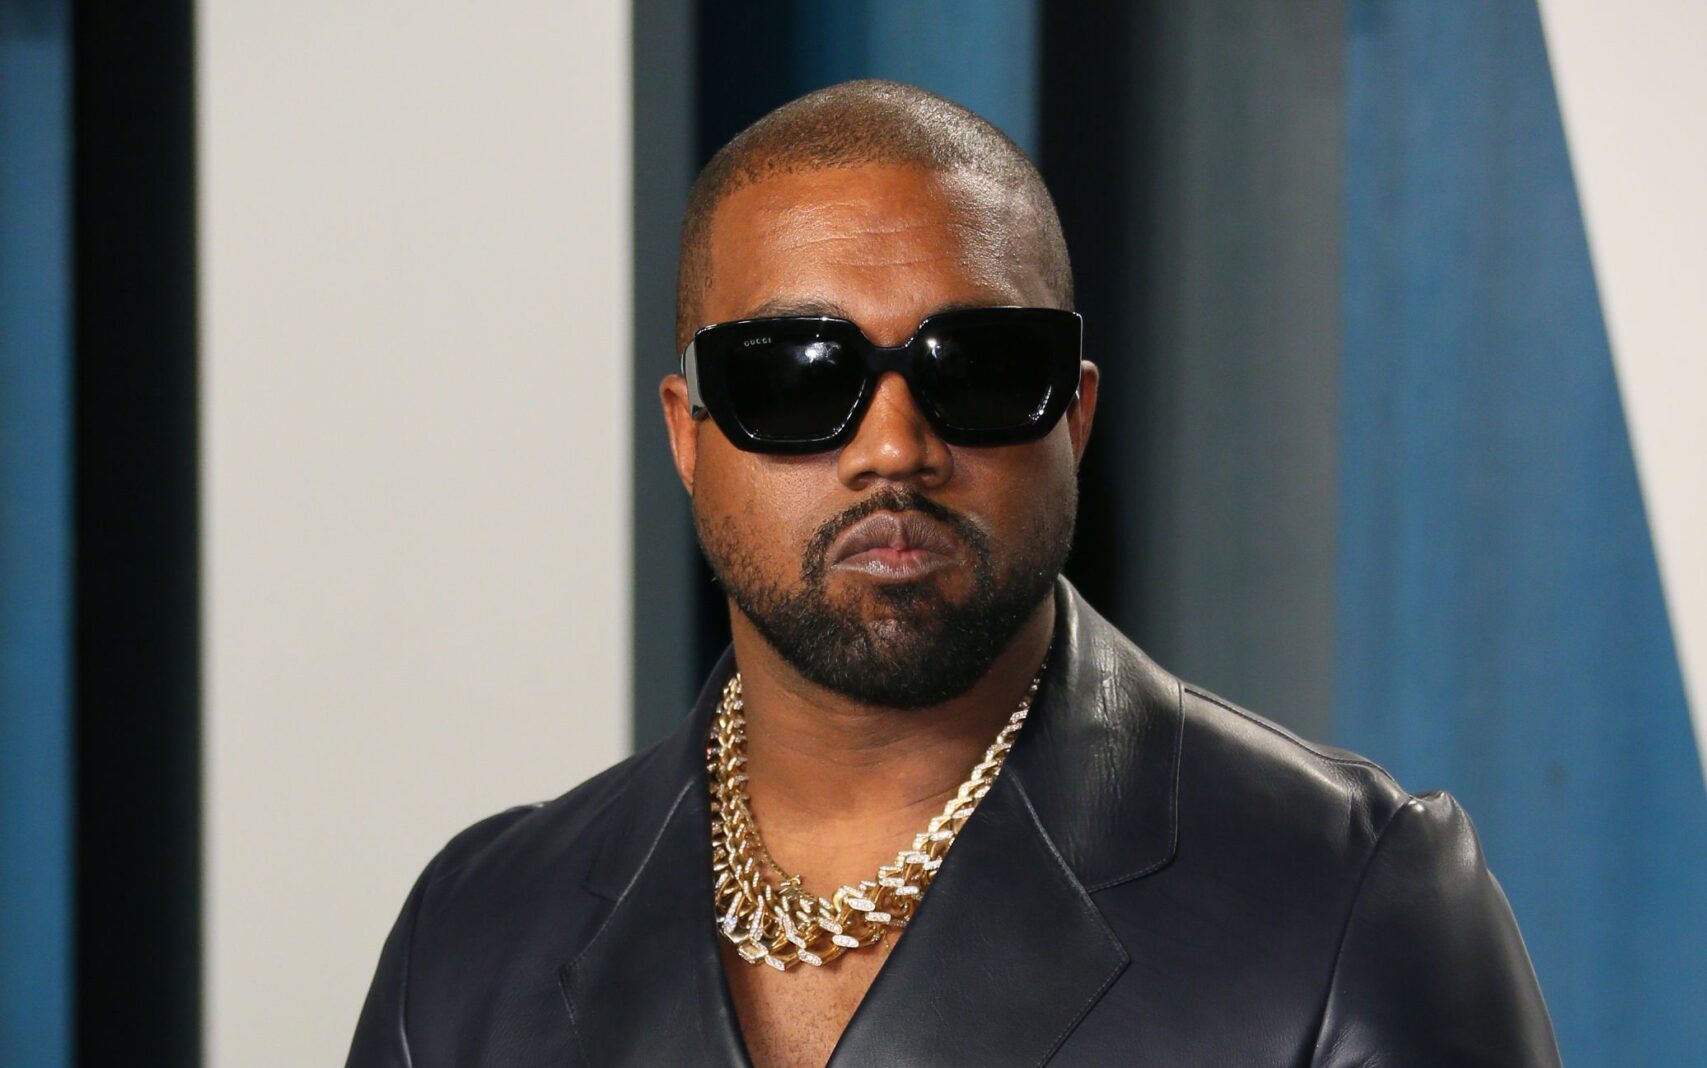 JUST IN: Twitter Locks Kanye West Out of Account After Tweet Declaring War on Jews